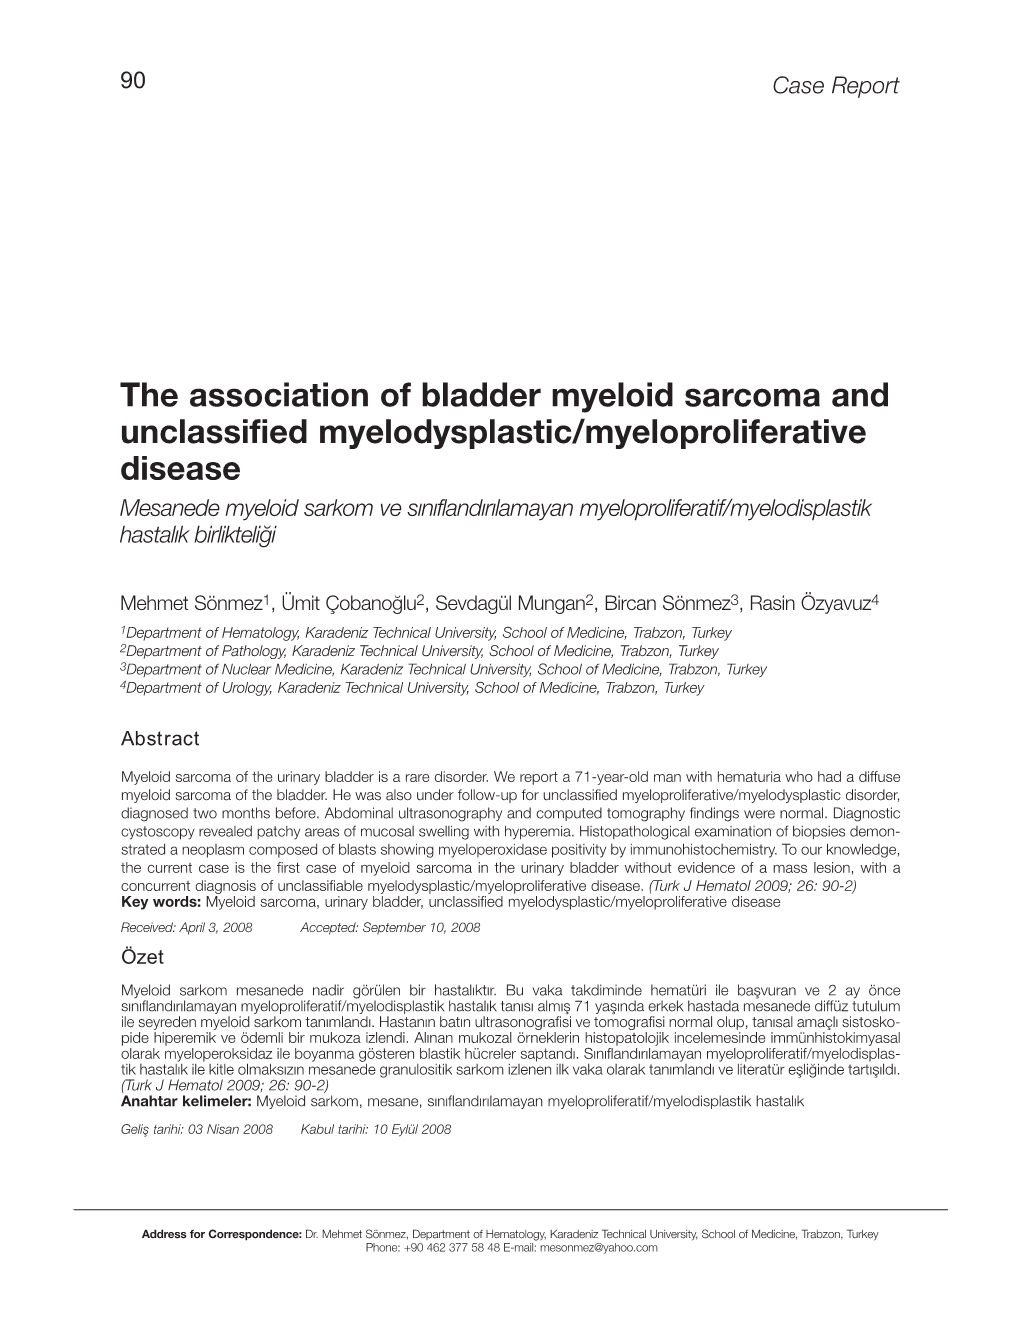 The Association of Bladder Myeloid Sarcoma and Unclassified